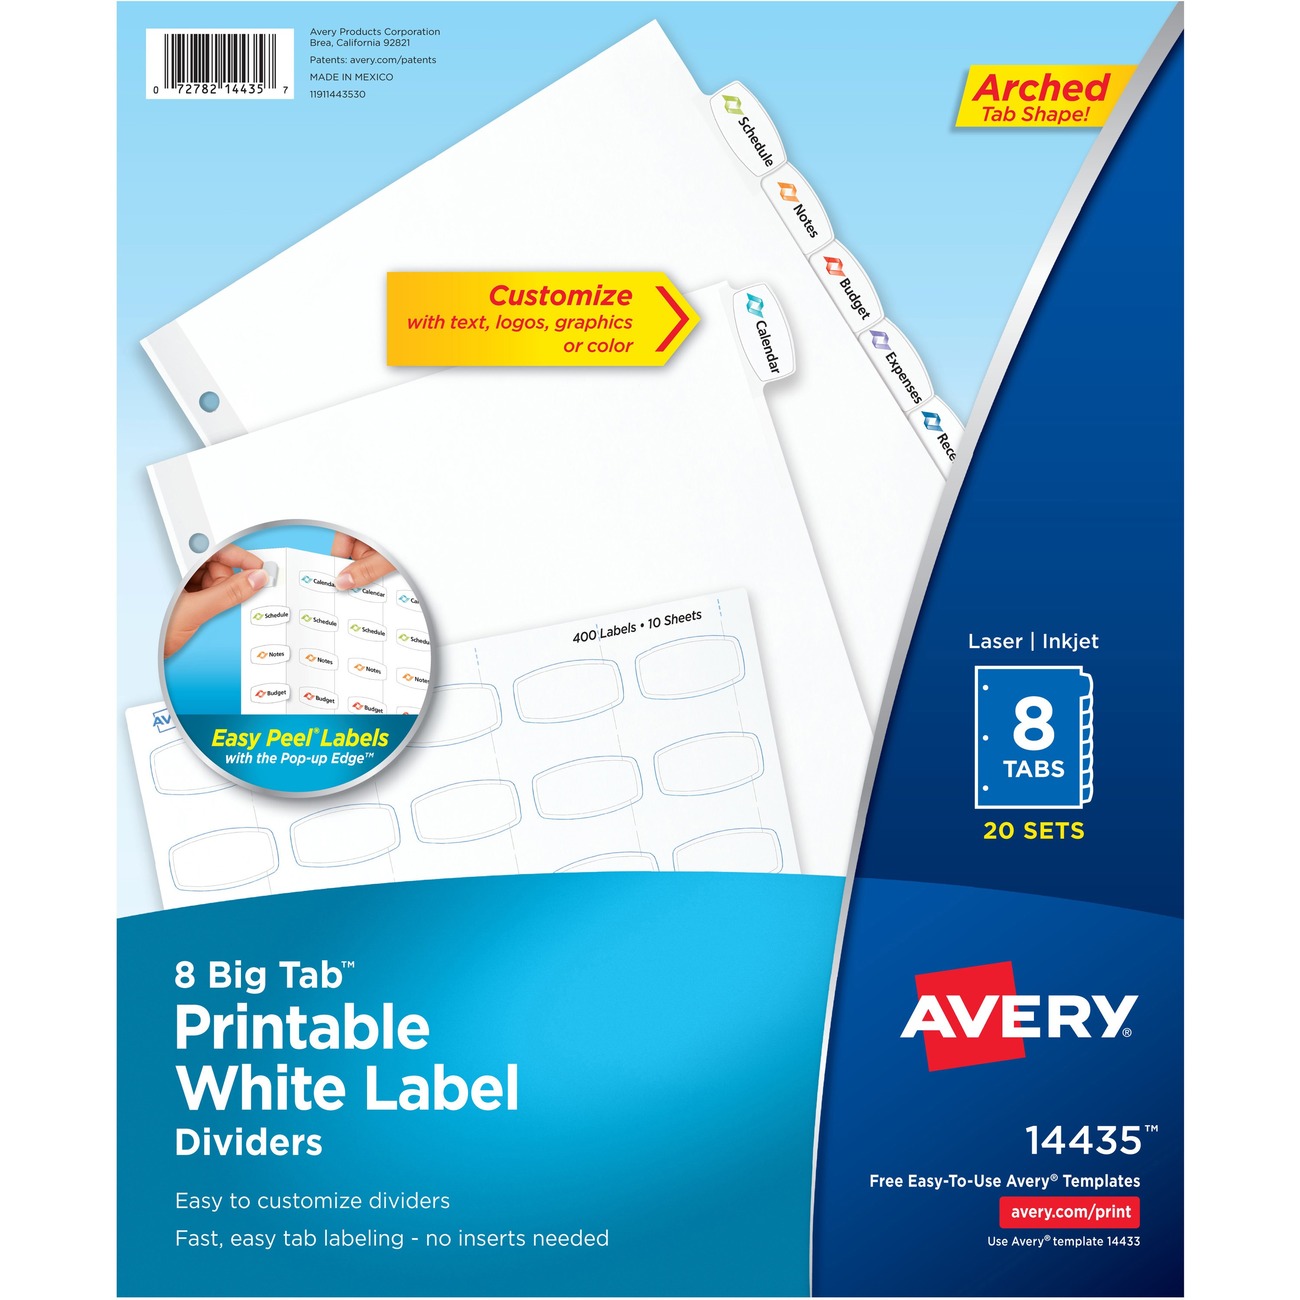 Staples 8 Tab Template Download 34 Avery 8 Tab Label Template Label Design Ideas 2020 Debbie